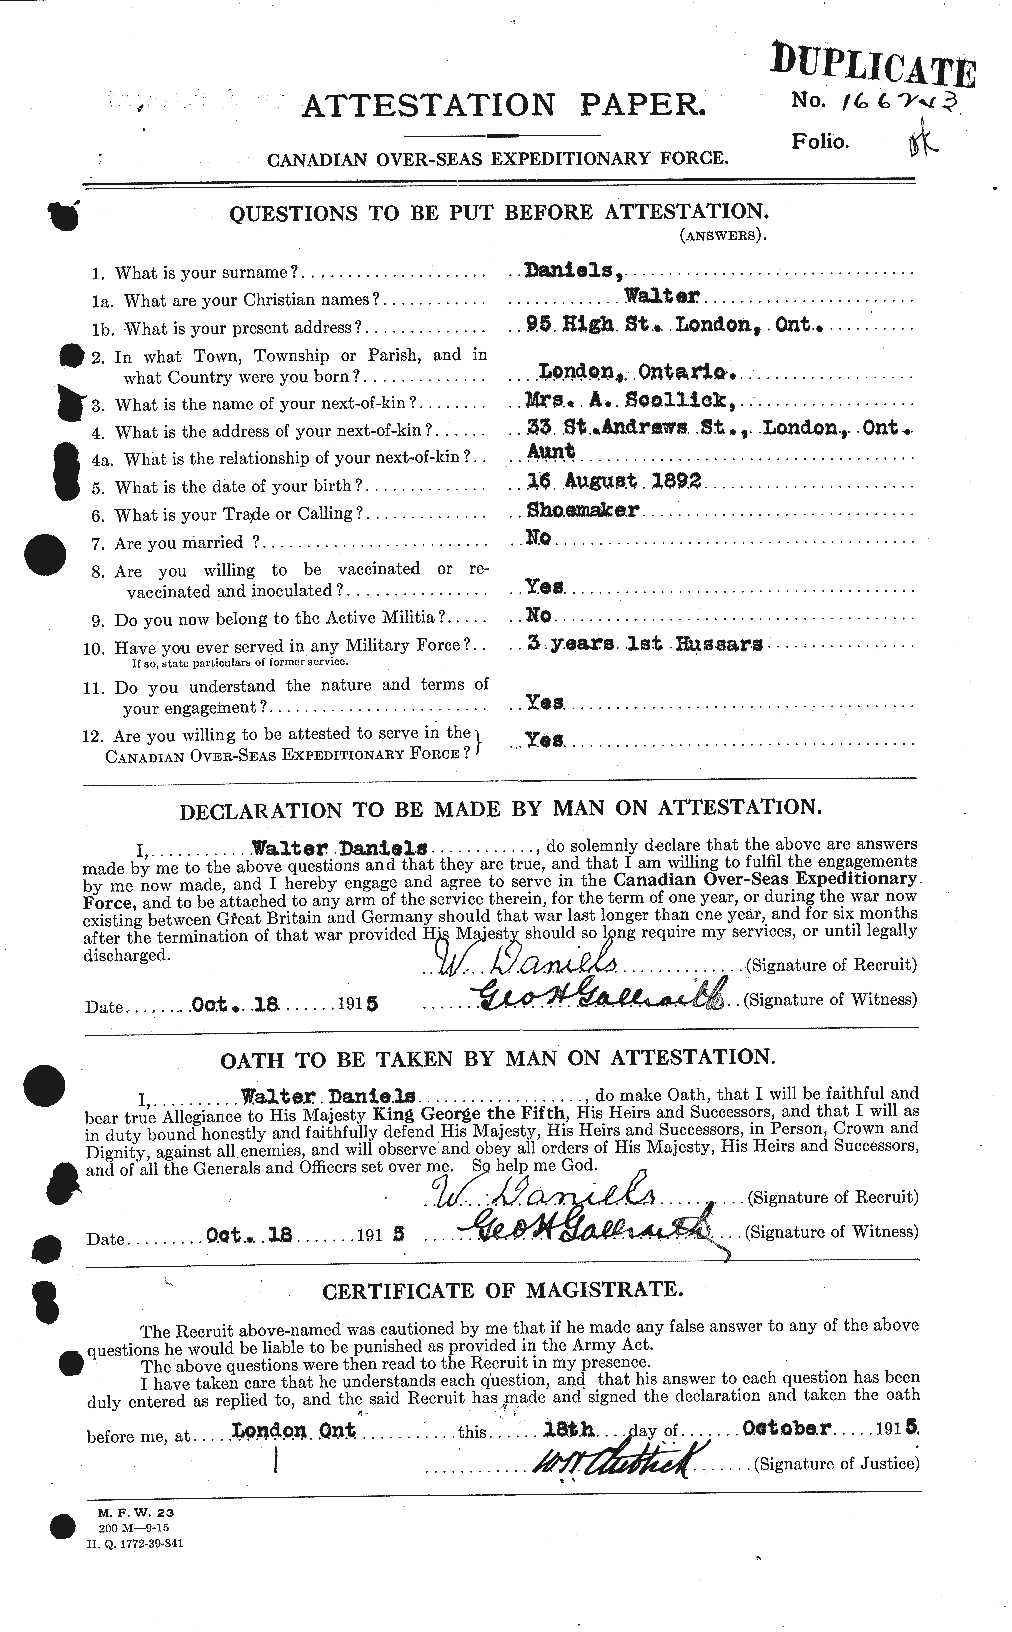 Personnel Records of the First World War - CEF 279682a